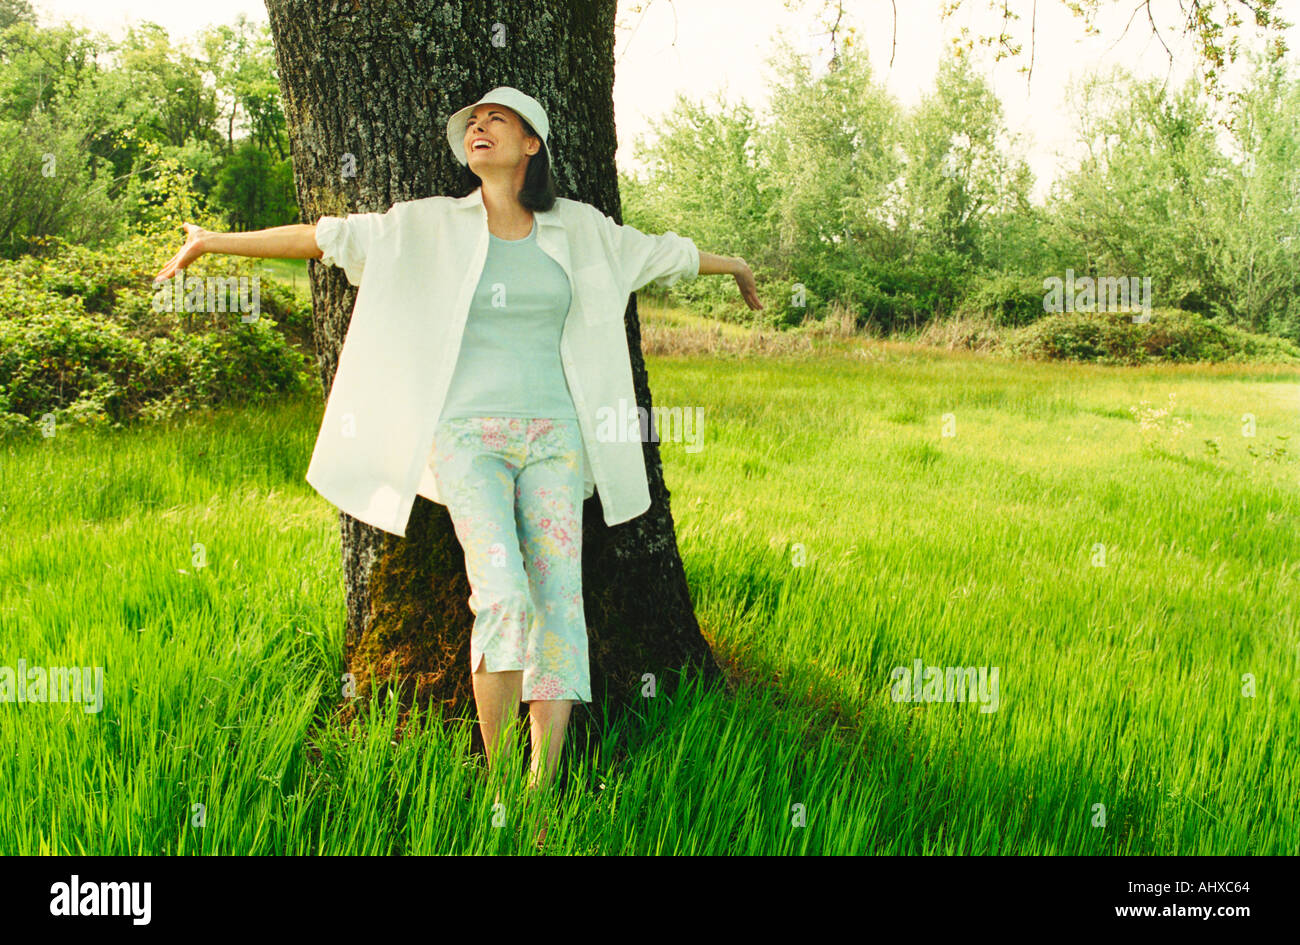 Expressive woman leaning against tree in field Stock Photo